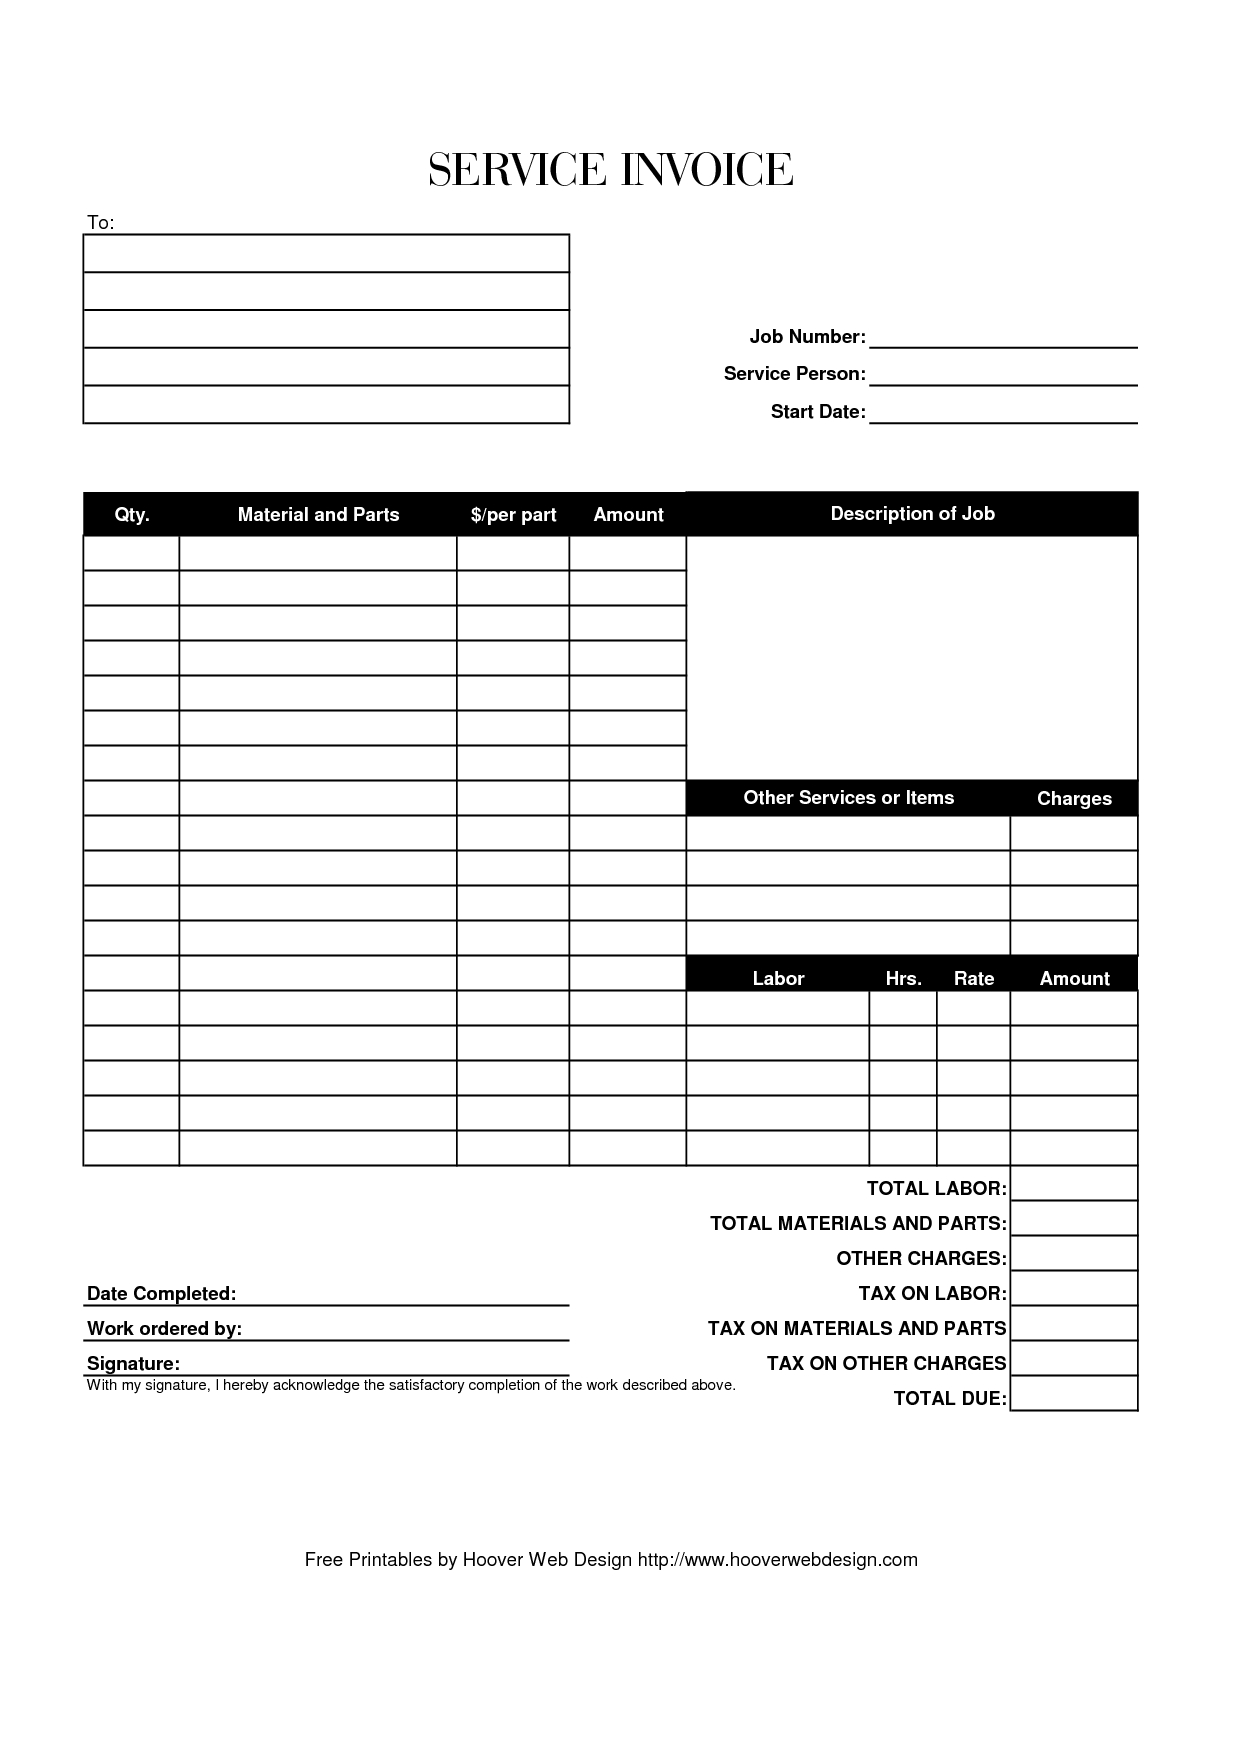 hoover receipts free printable service invoice template free blank invoice template pdf